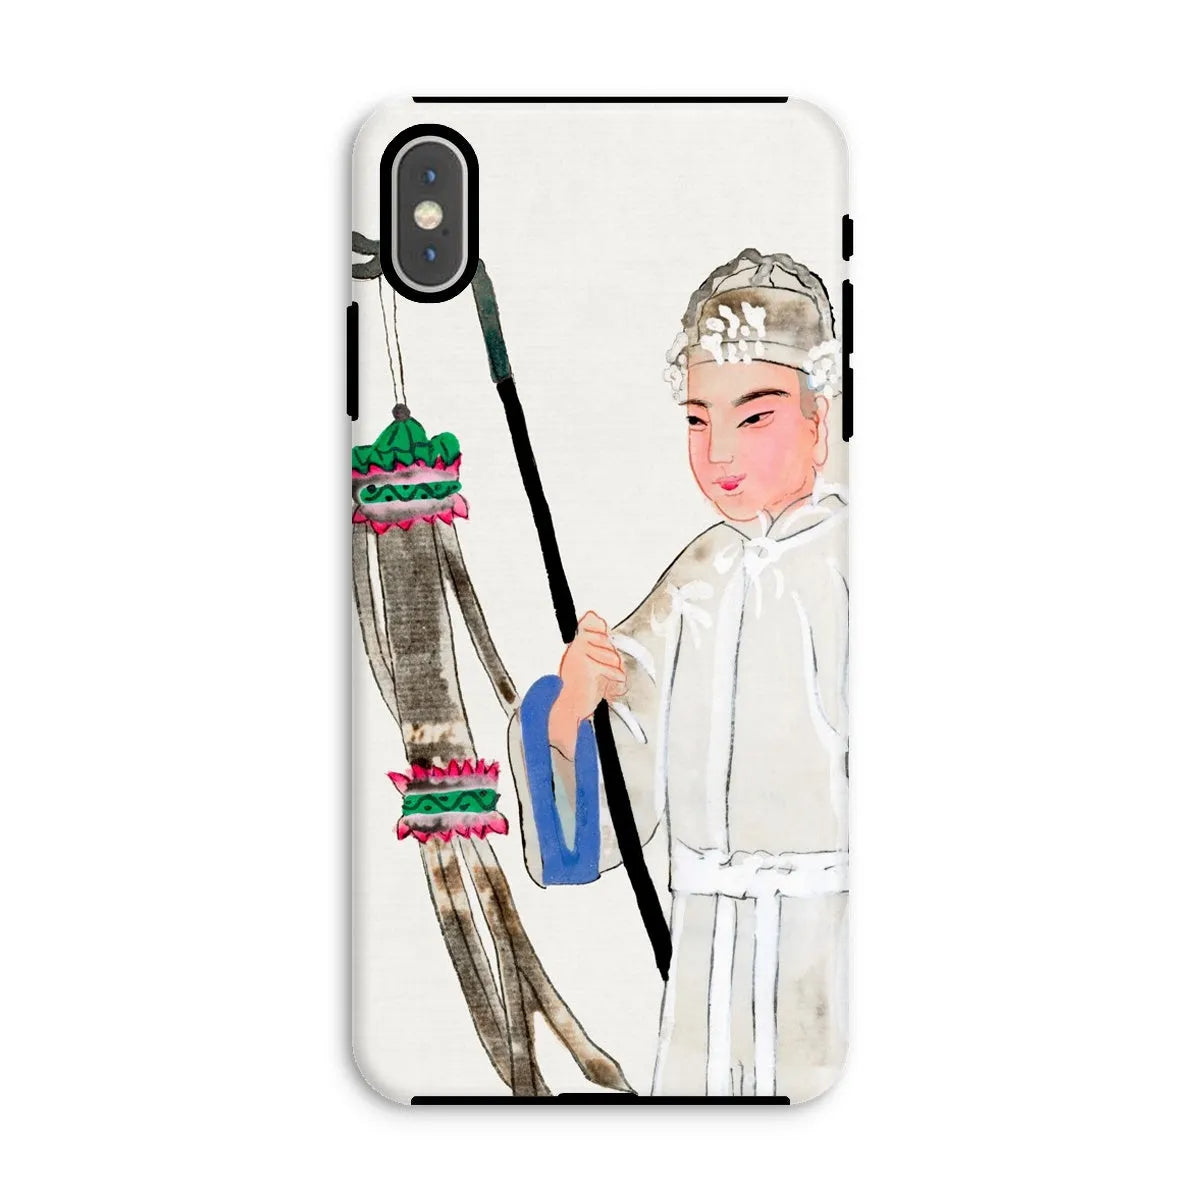 Man In Mourning - Chinese Historical Art Phone Case - Iphone Xs Max / Matte - Mobile Phone Cases - Aesthetic Art